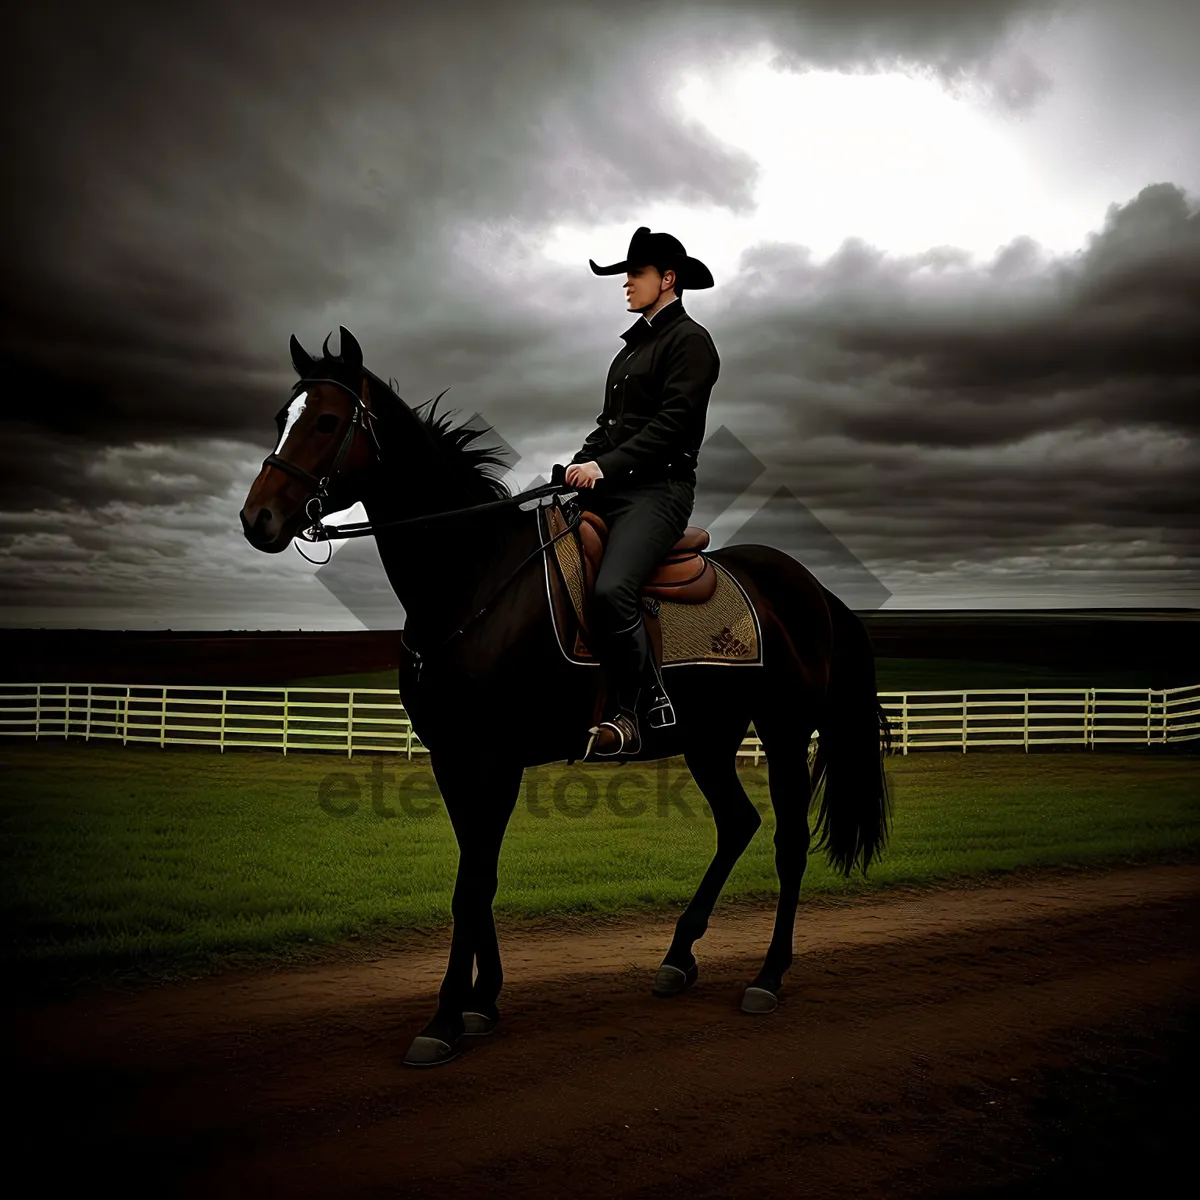 Picture of Speedy Stallion Polo Match Riding Sidesaddle